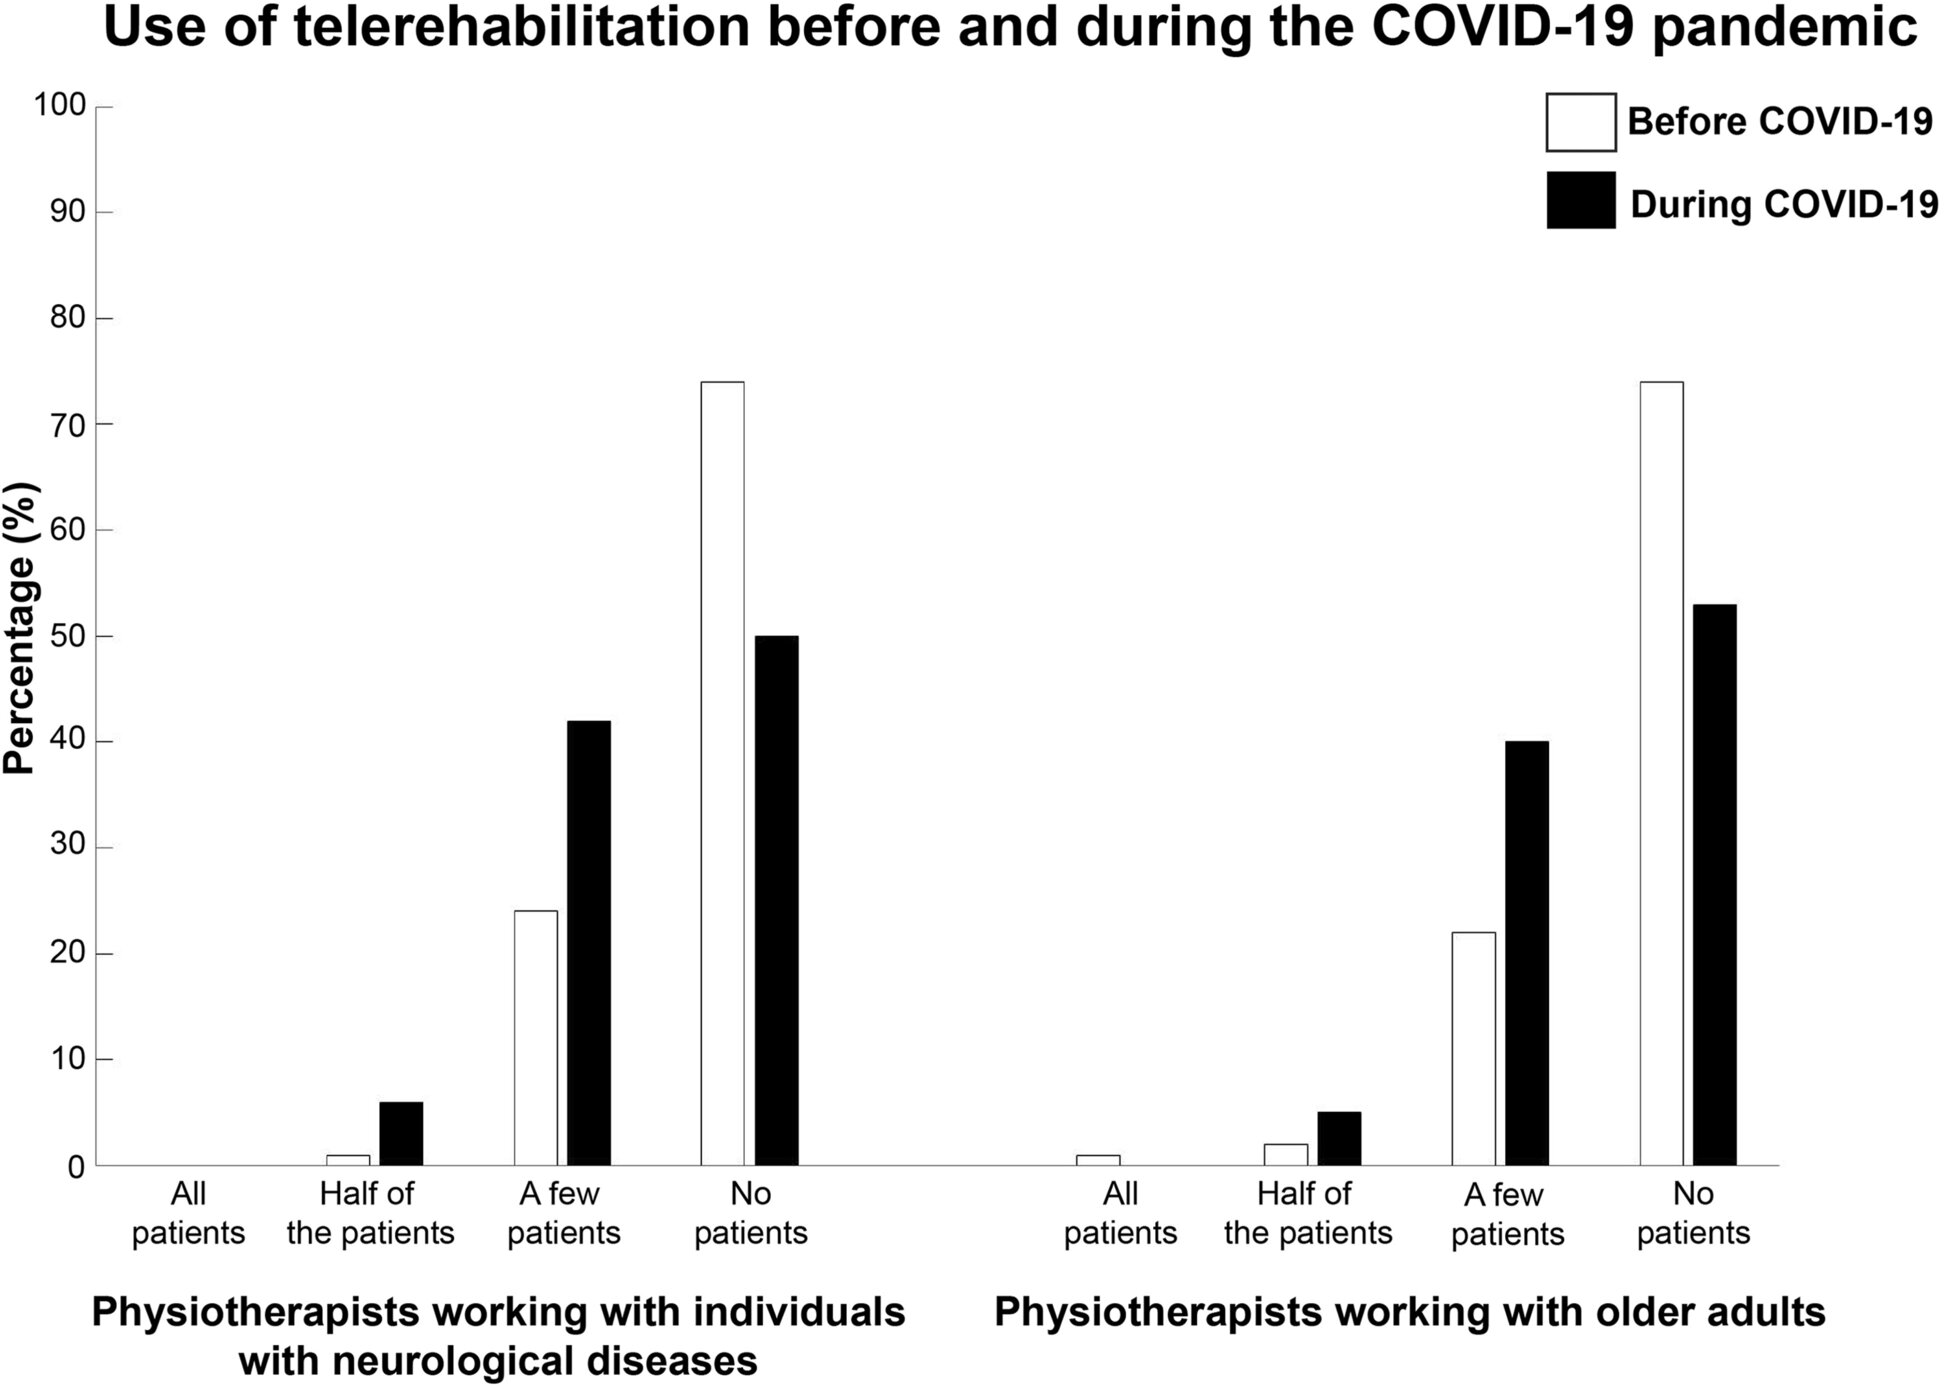 #Few physiotherapists used telerehabilitation services during the COVID-19 pandemic